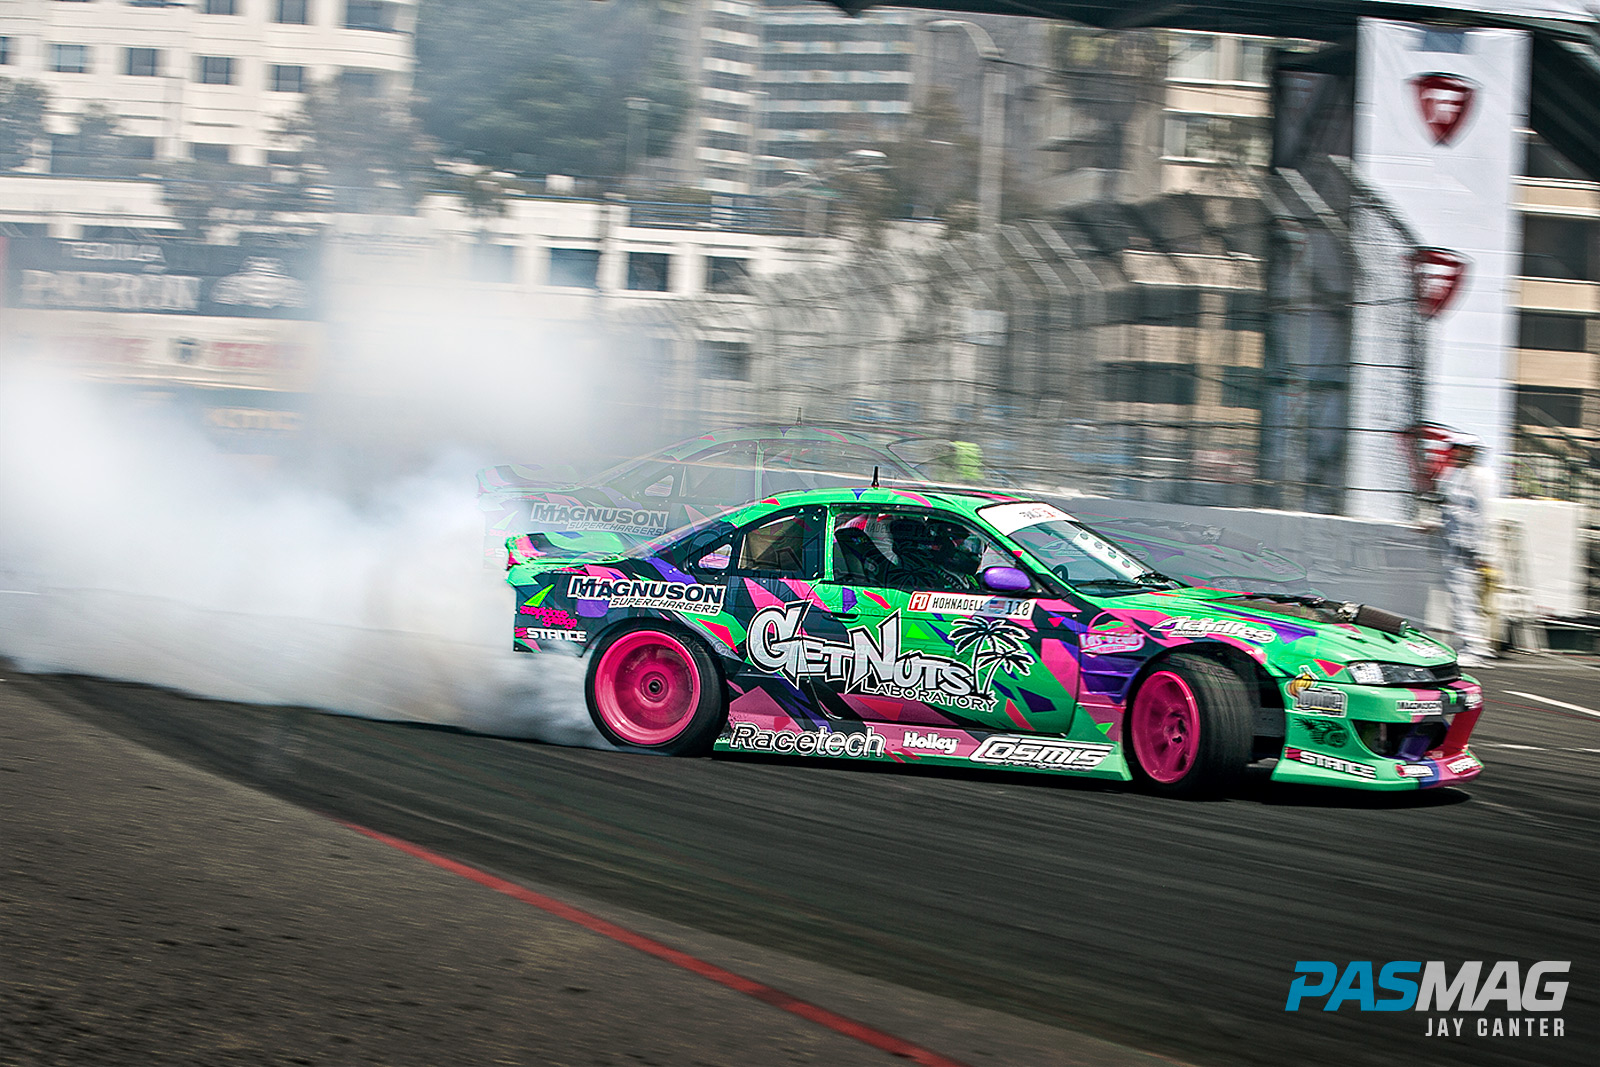 Alec Hohnadell 1995 Nissan 240sx S14 PASMAG canter 8